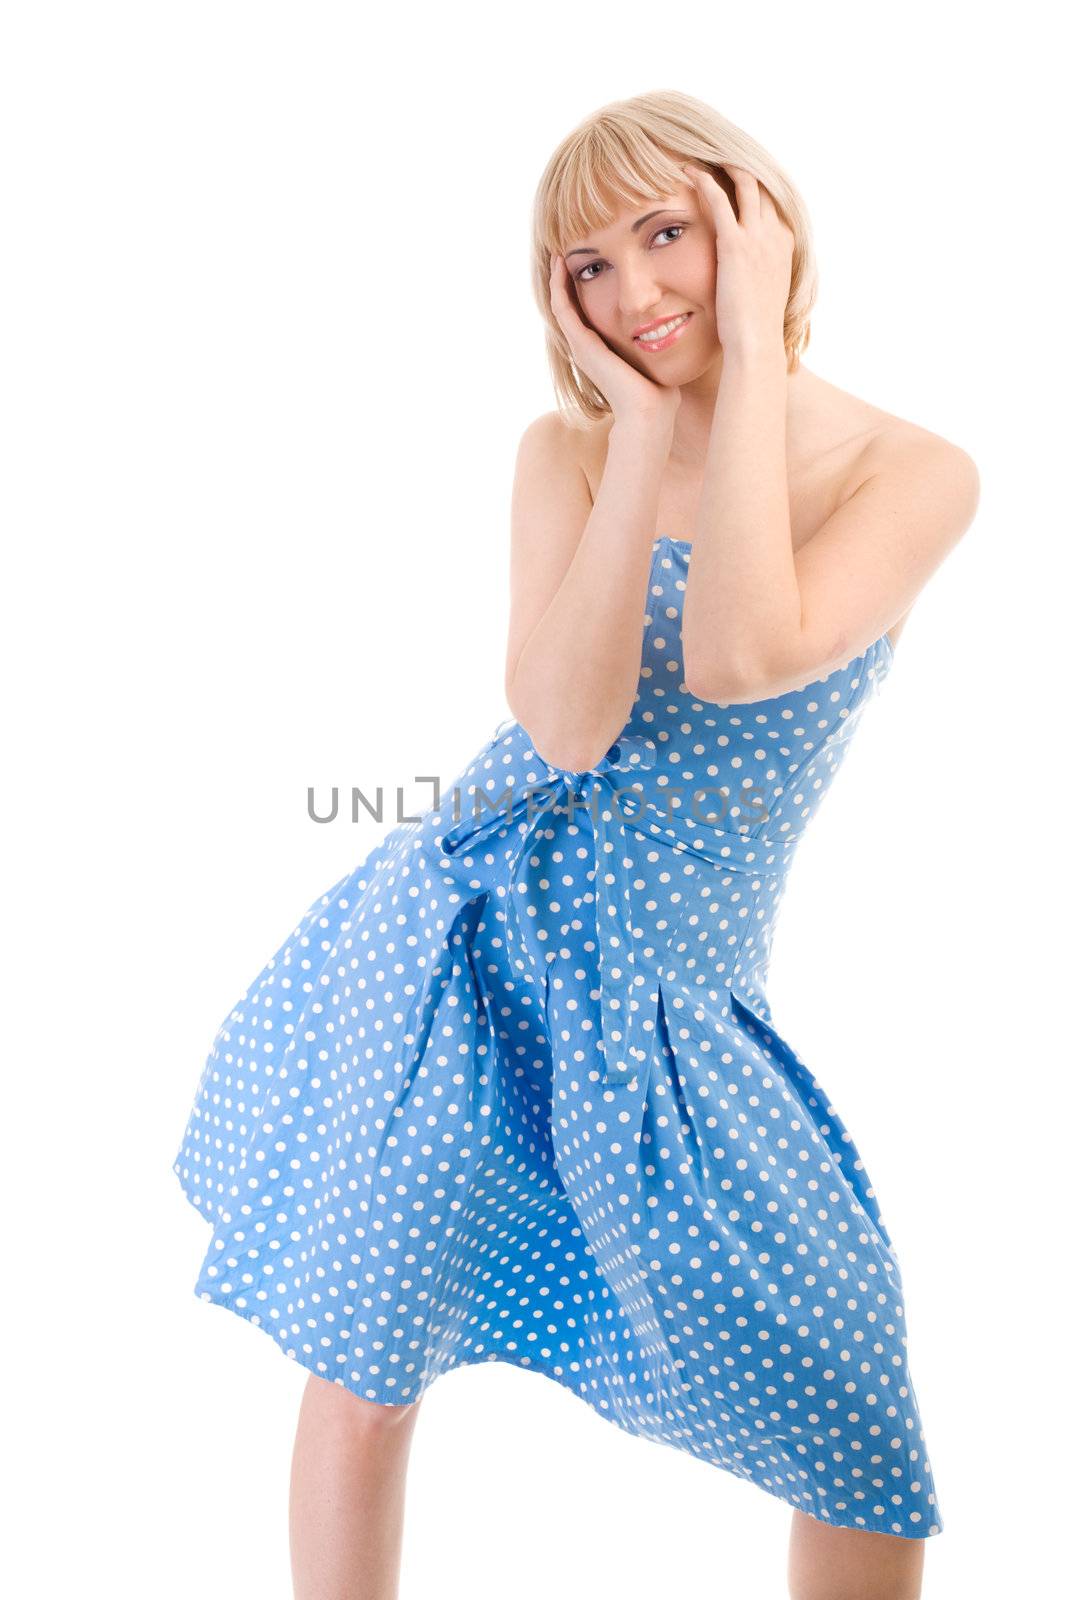 Dancing girl in blue dress on isolated white